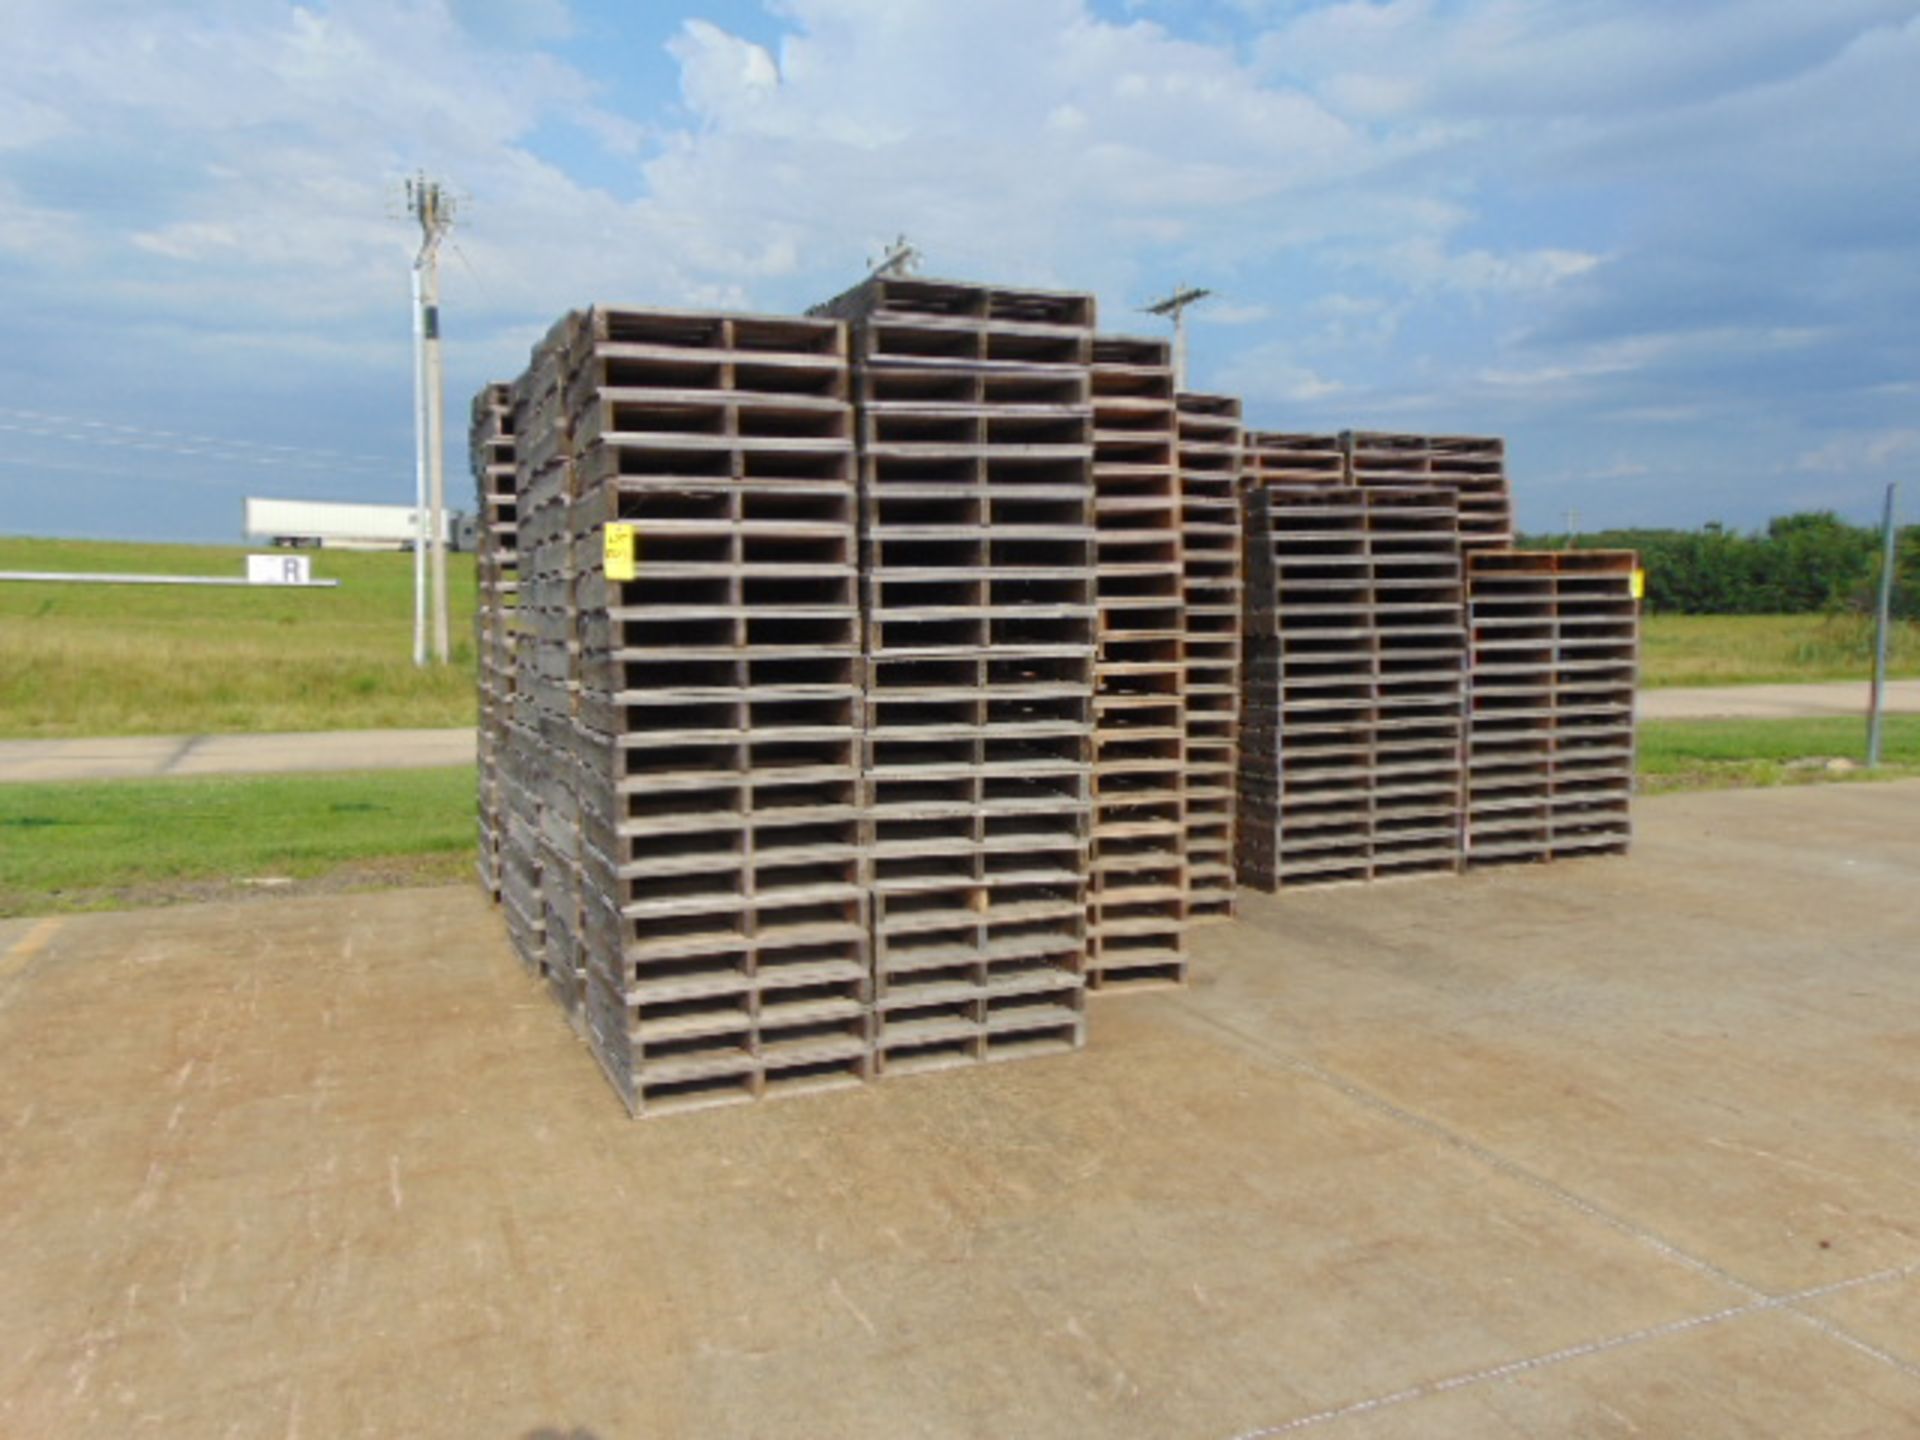 LOT OF PALLETS, assorted (in yard) (Located at: 401 Stephen Taylor Blvd. McAlester, OK 74501)